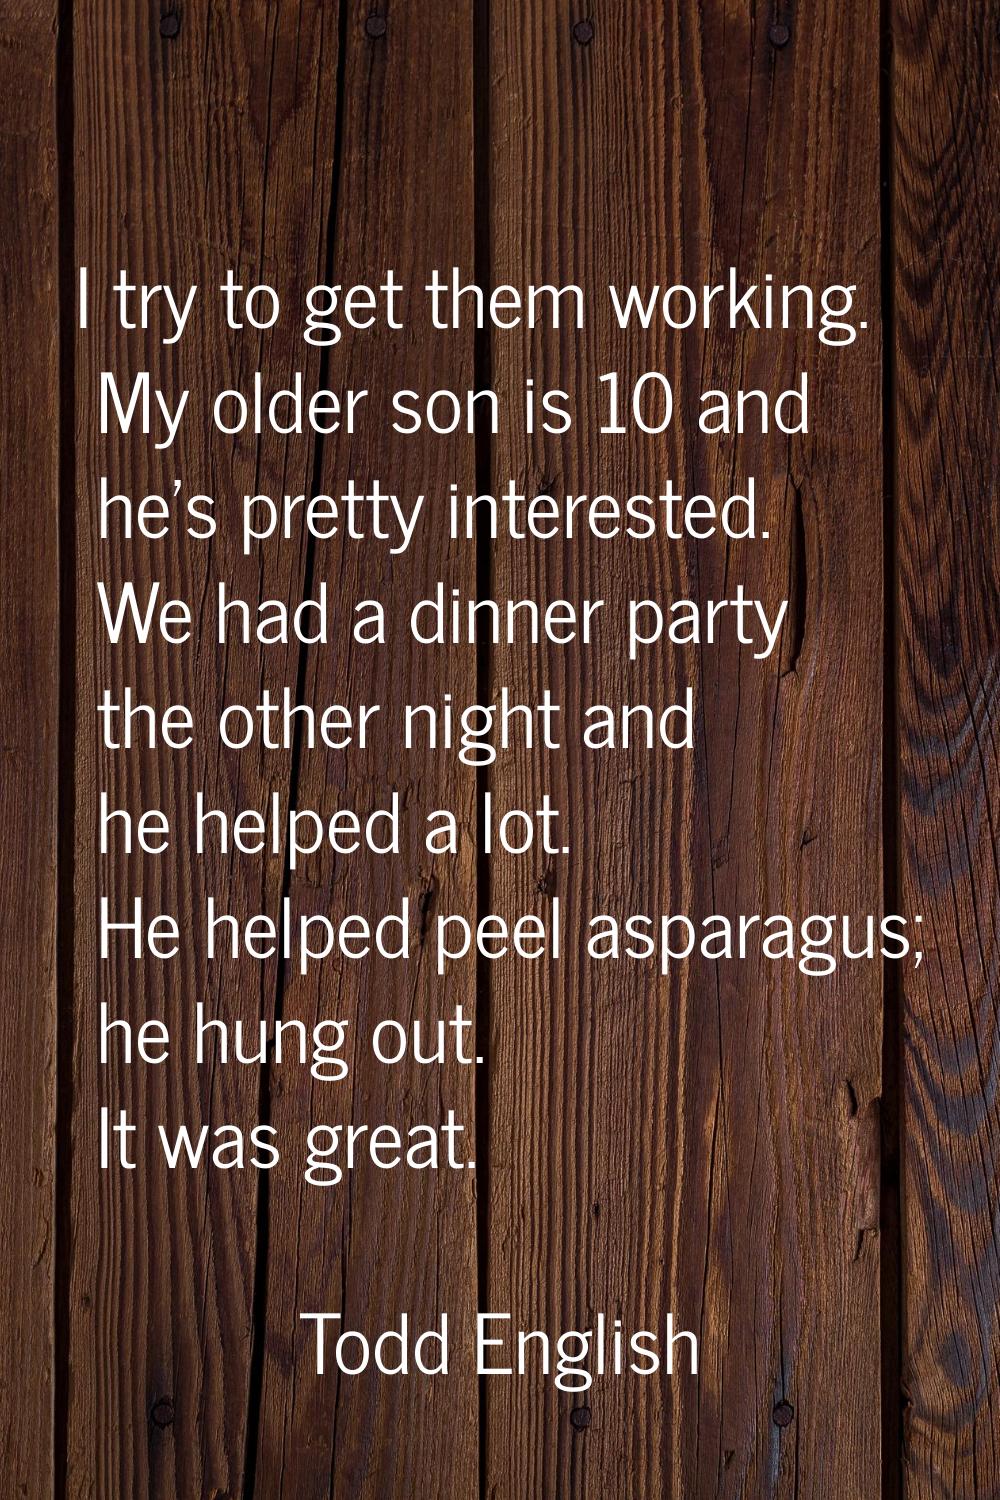 I try to get them working. My older son is 10 and he's pretty interested. We had a dinner party the